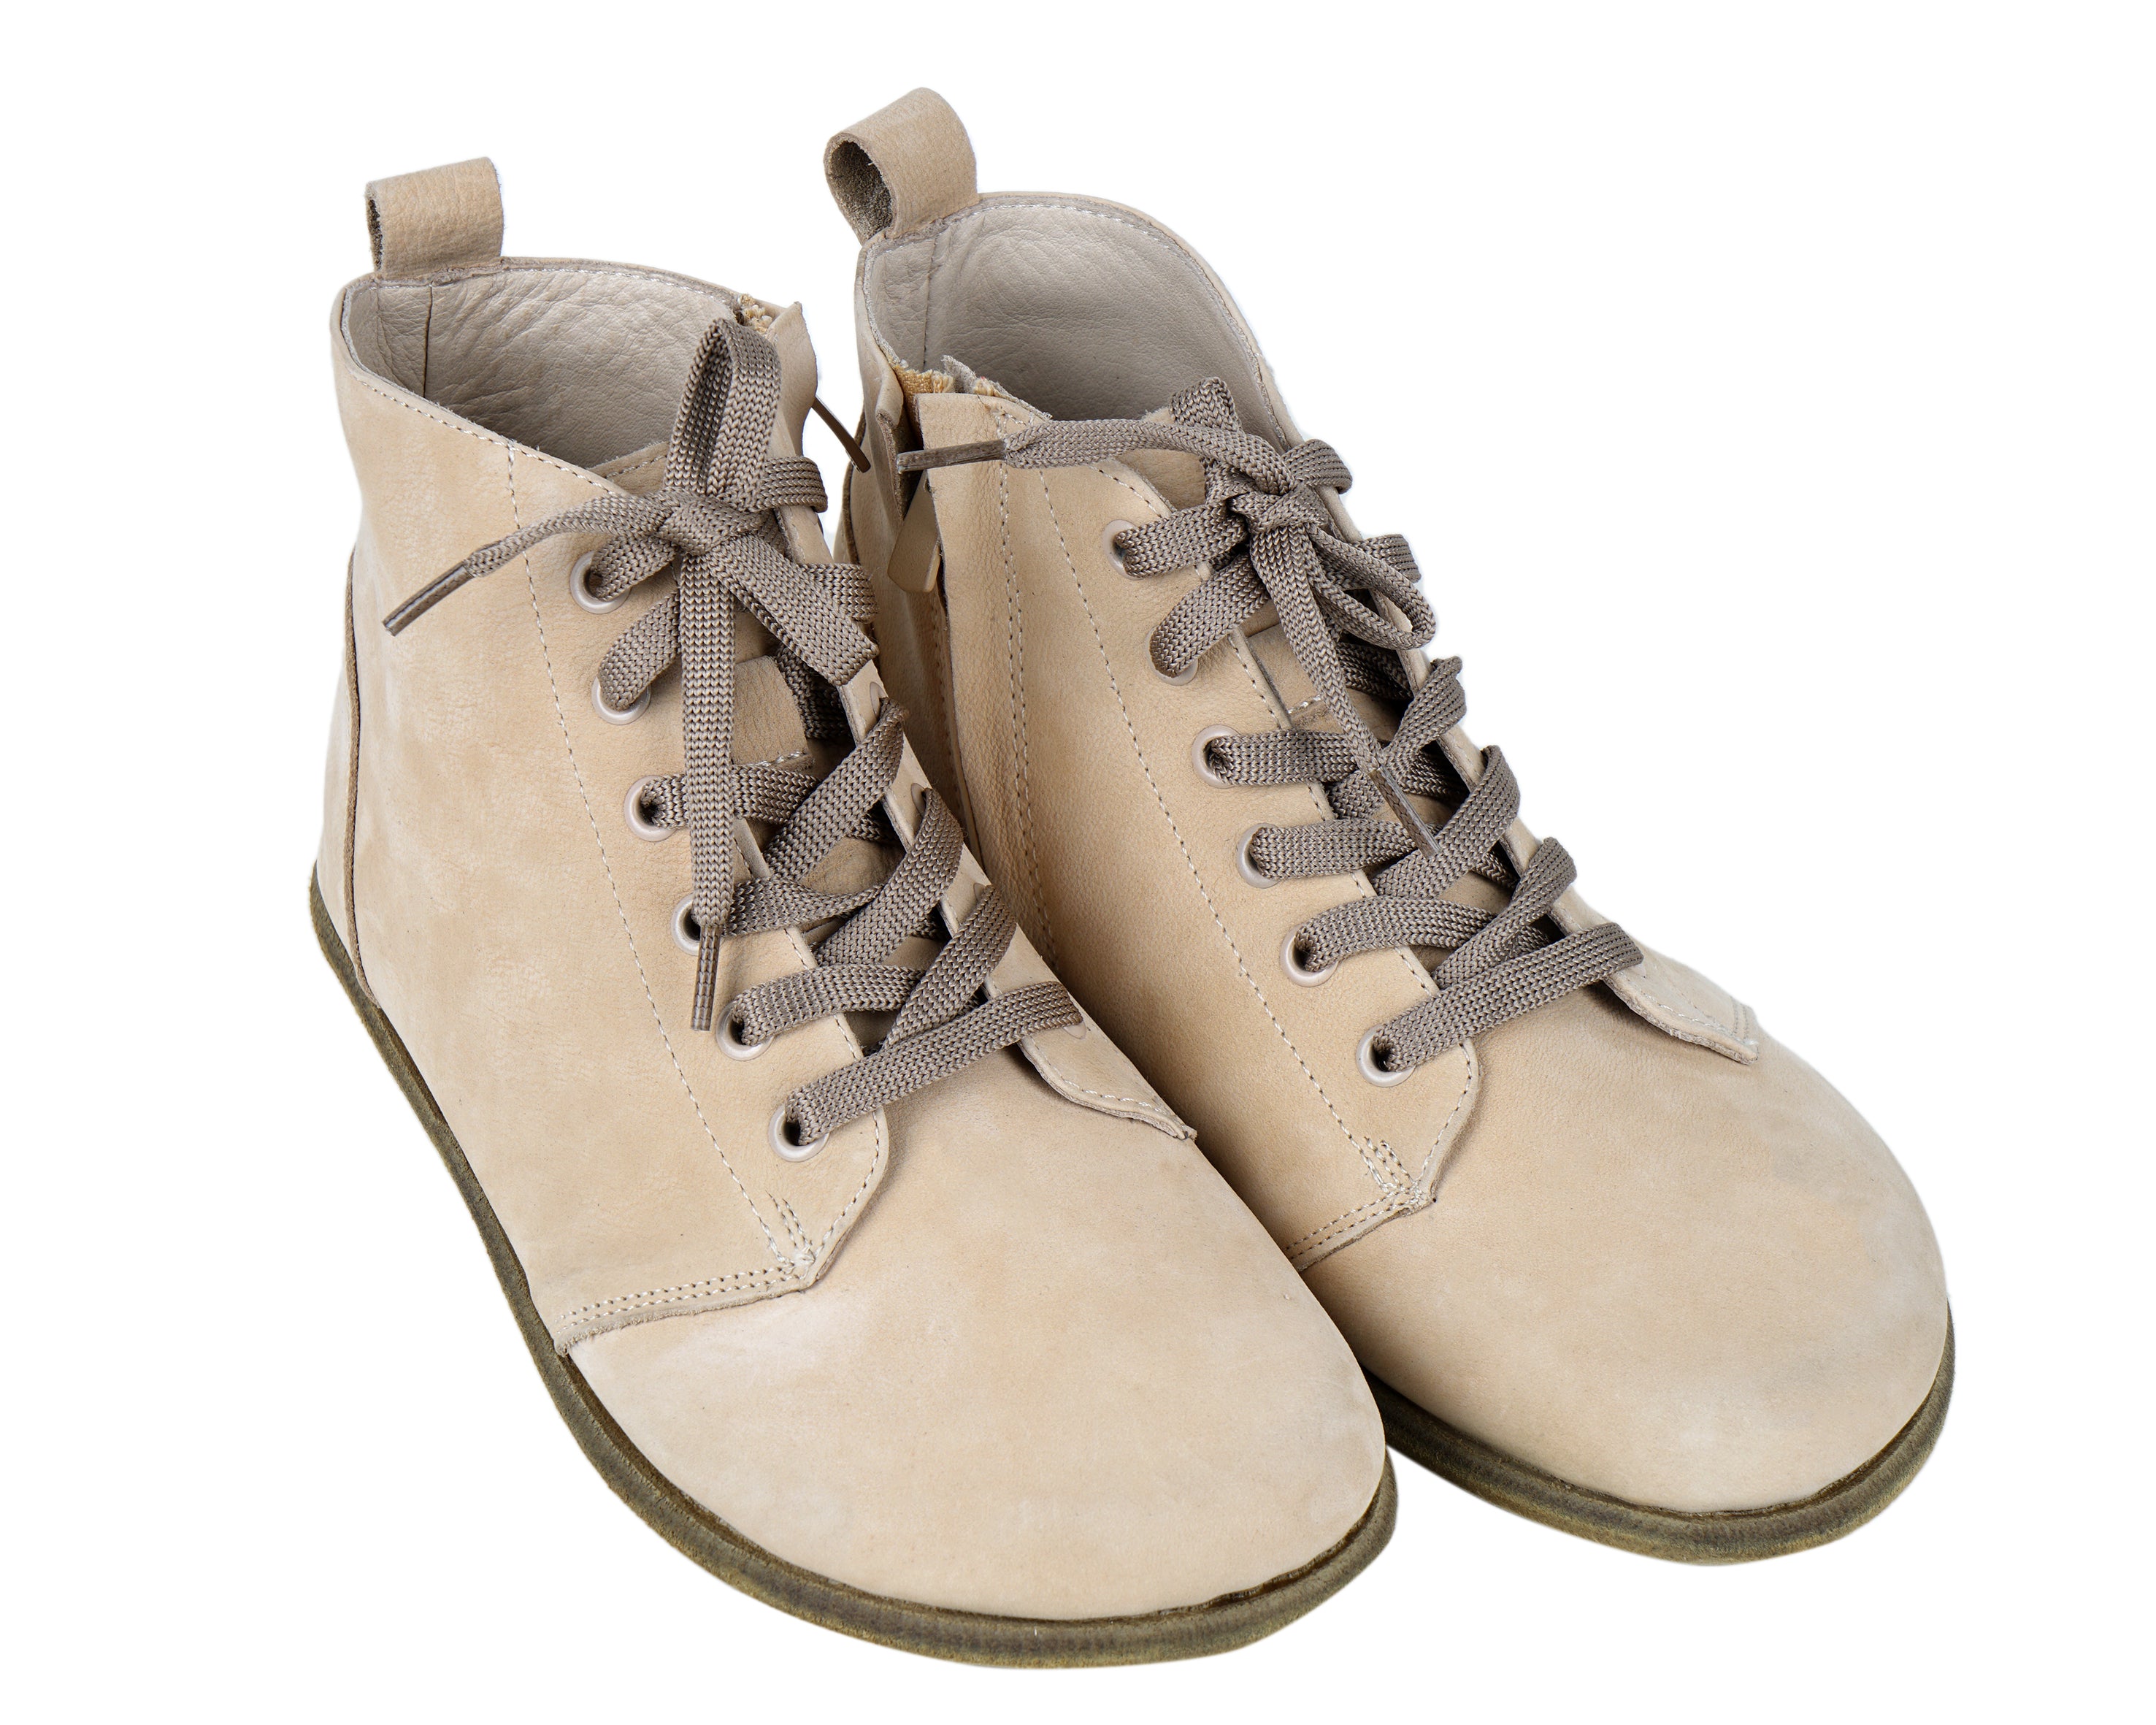 Cream Short Boots Wide Barefoot Nubuck Leather Handmade Shoes